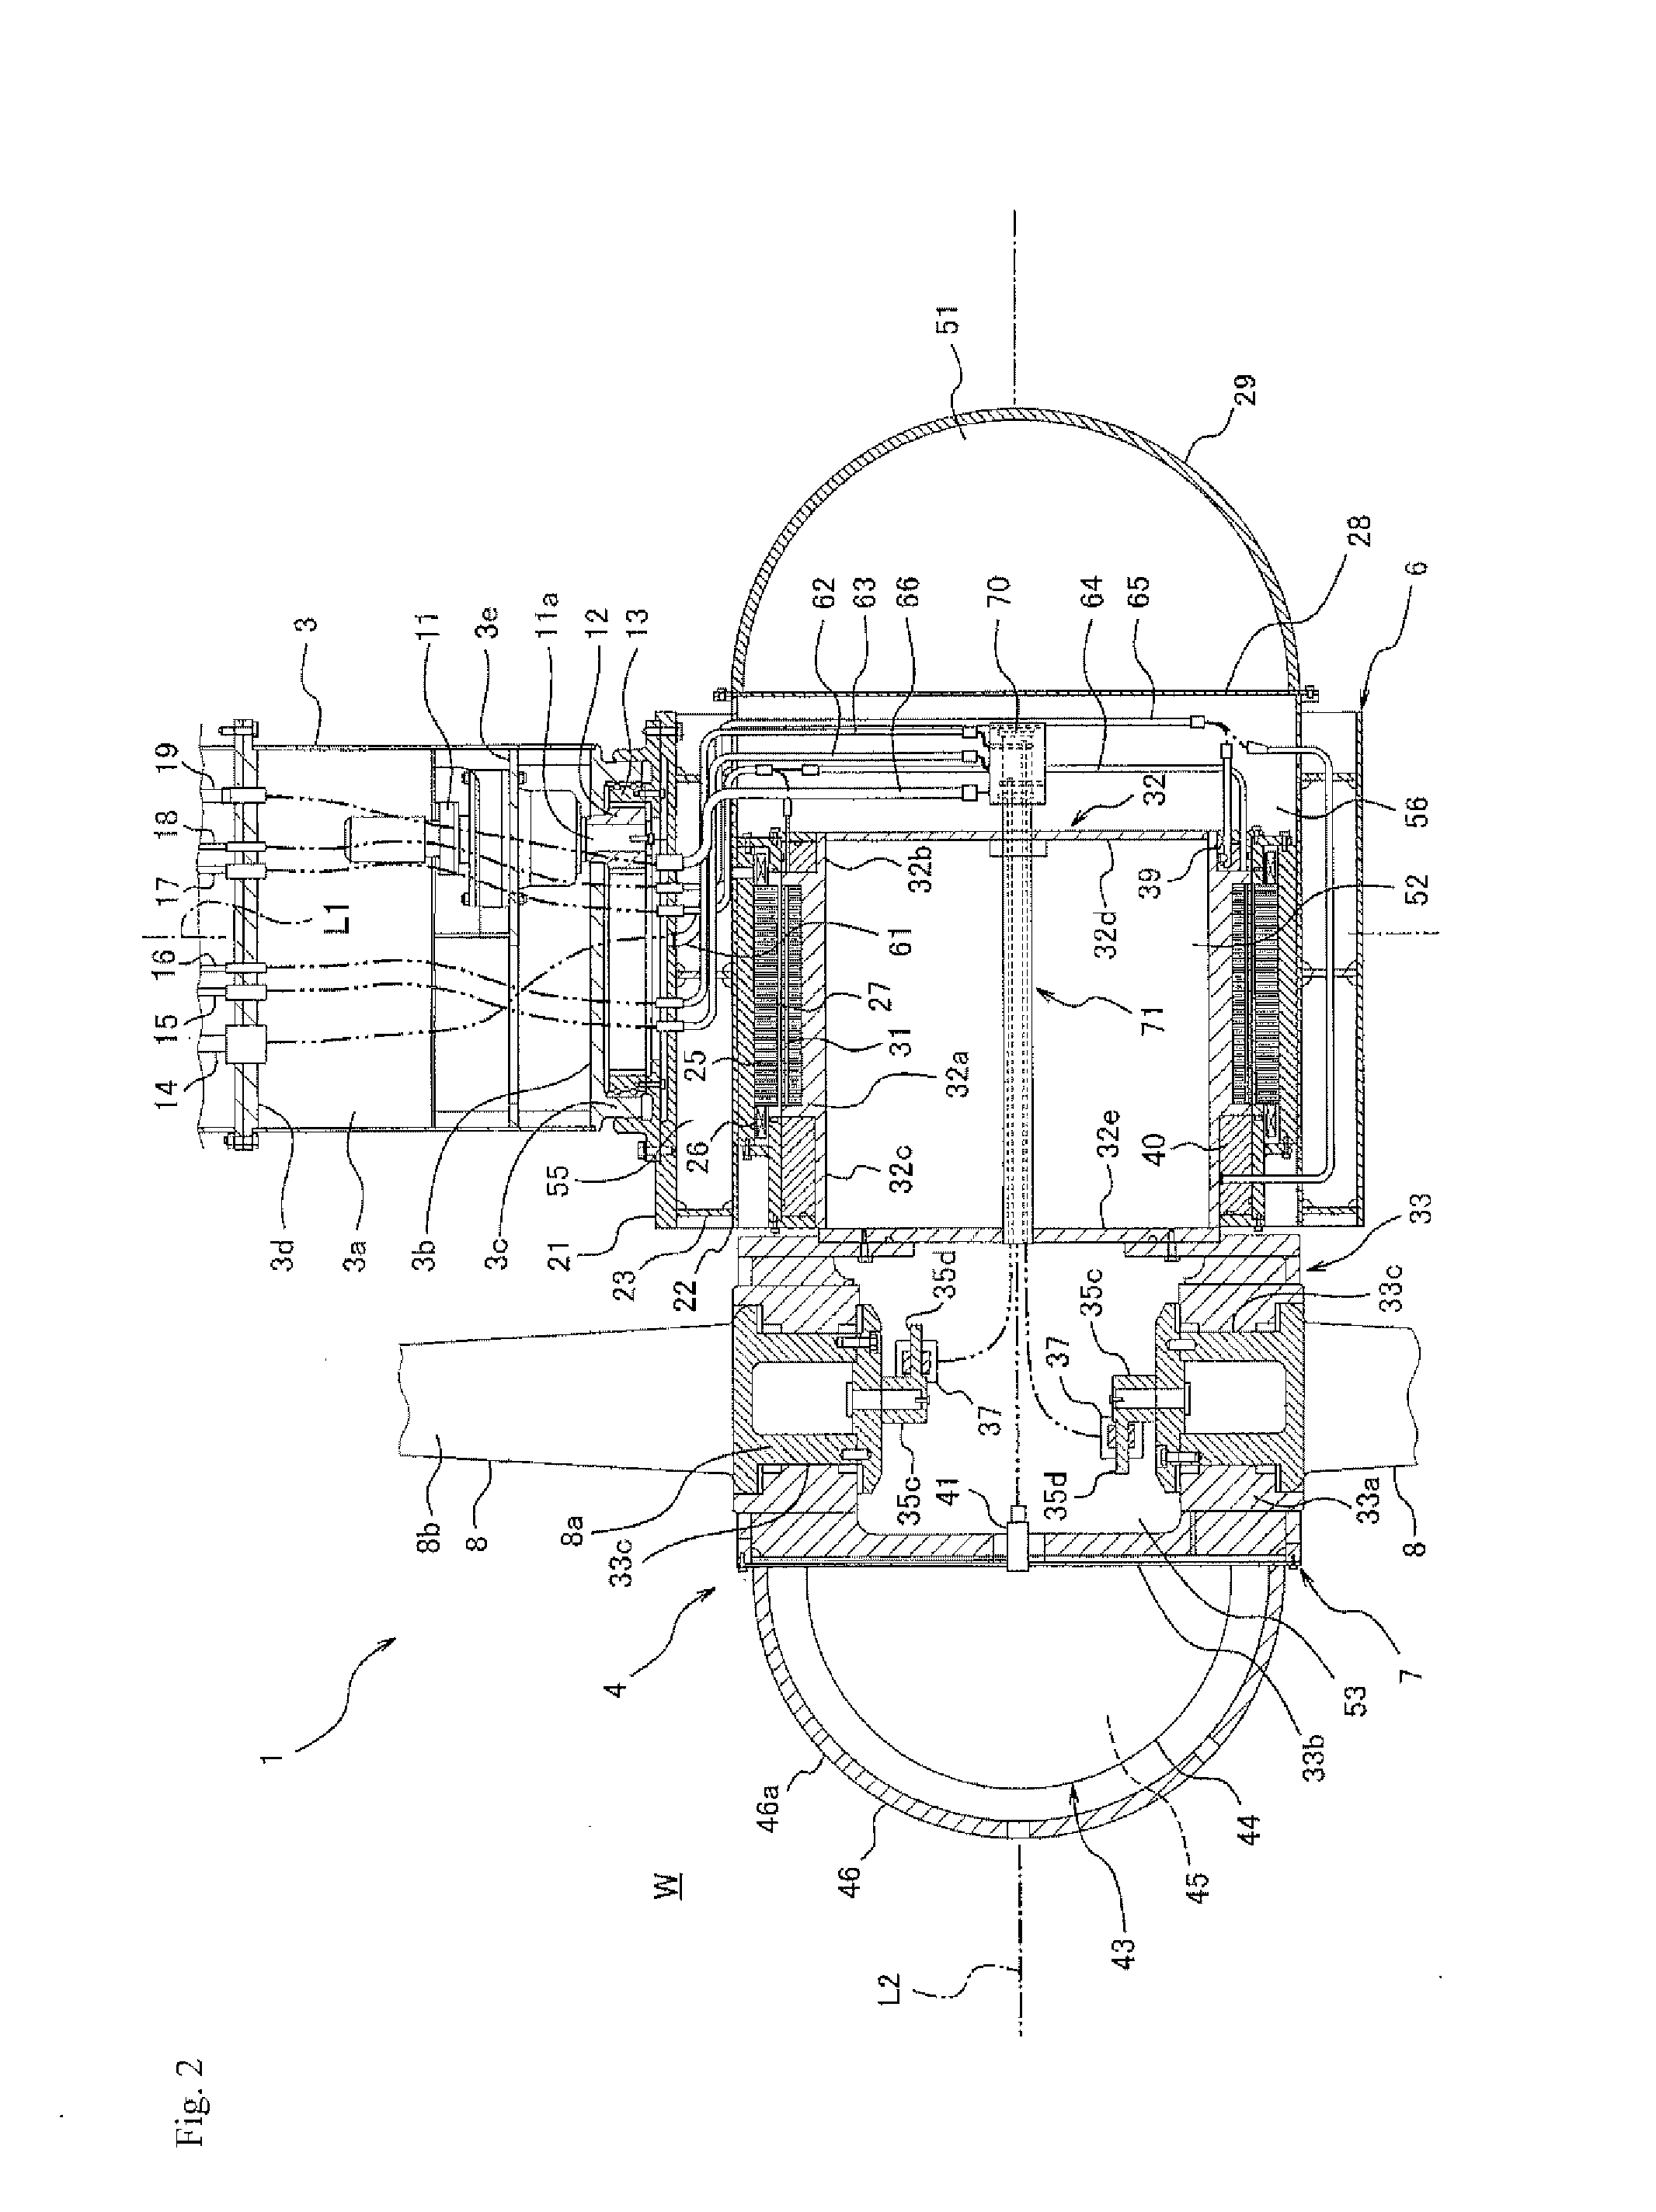 Water flow electricity generating device